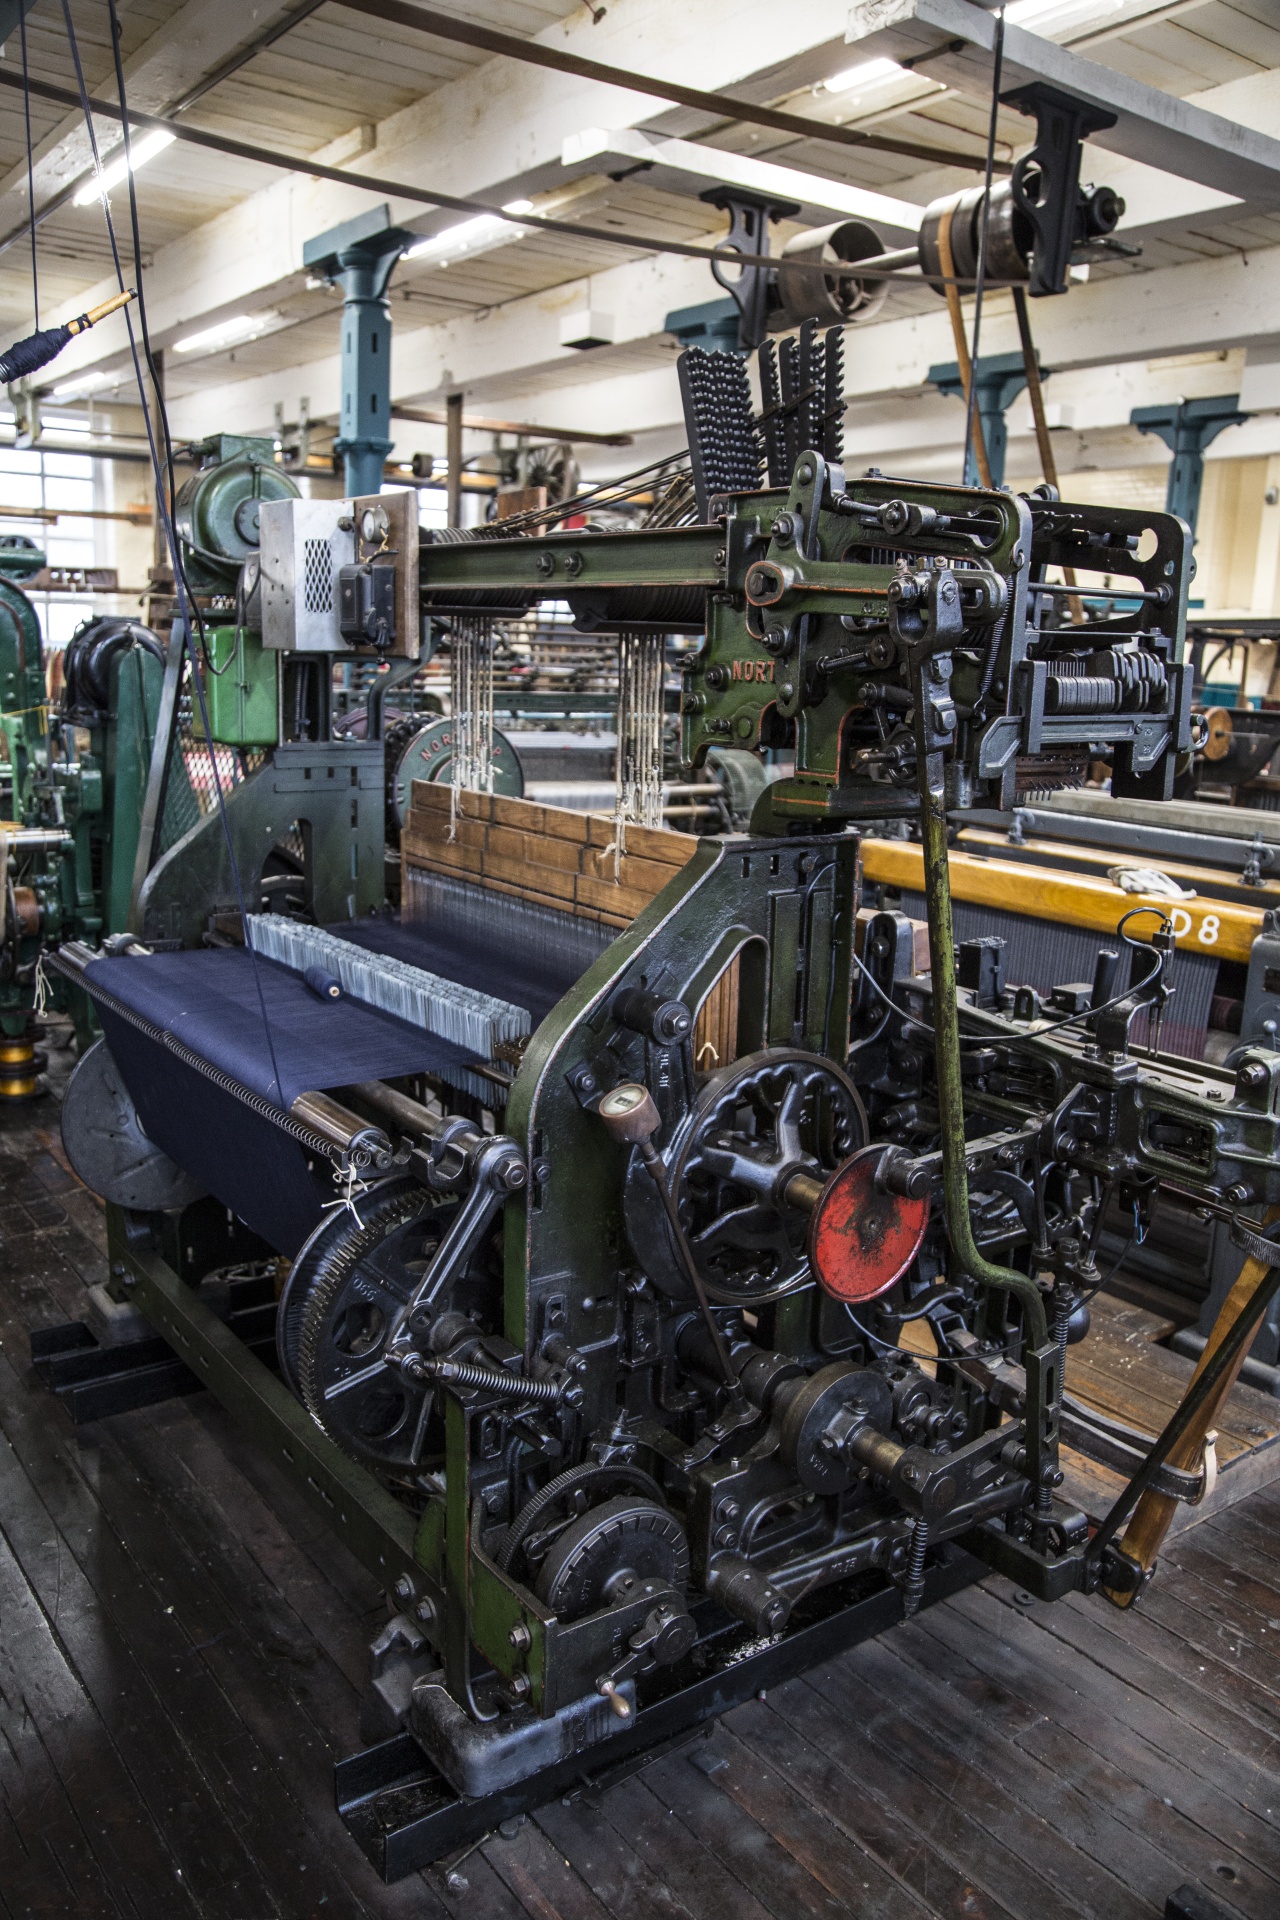 Textile Industry - Spinning machines at Bradford Industrial Museum